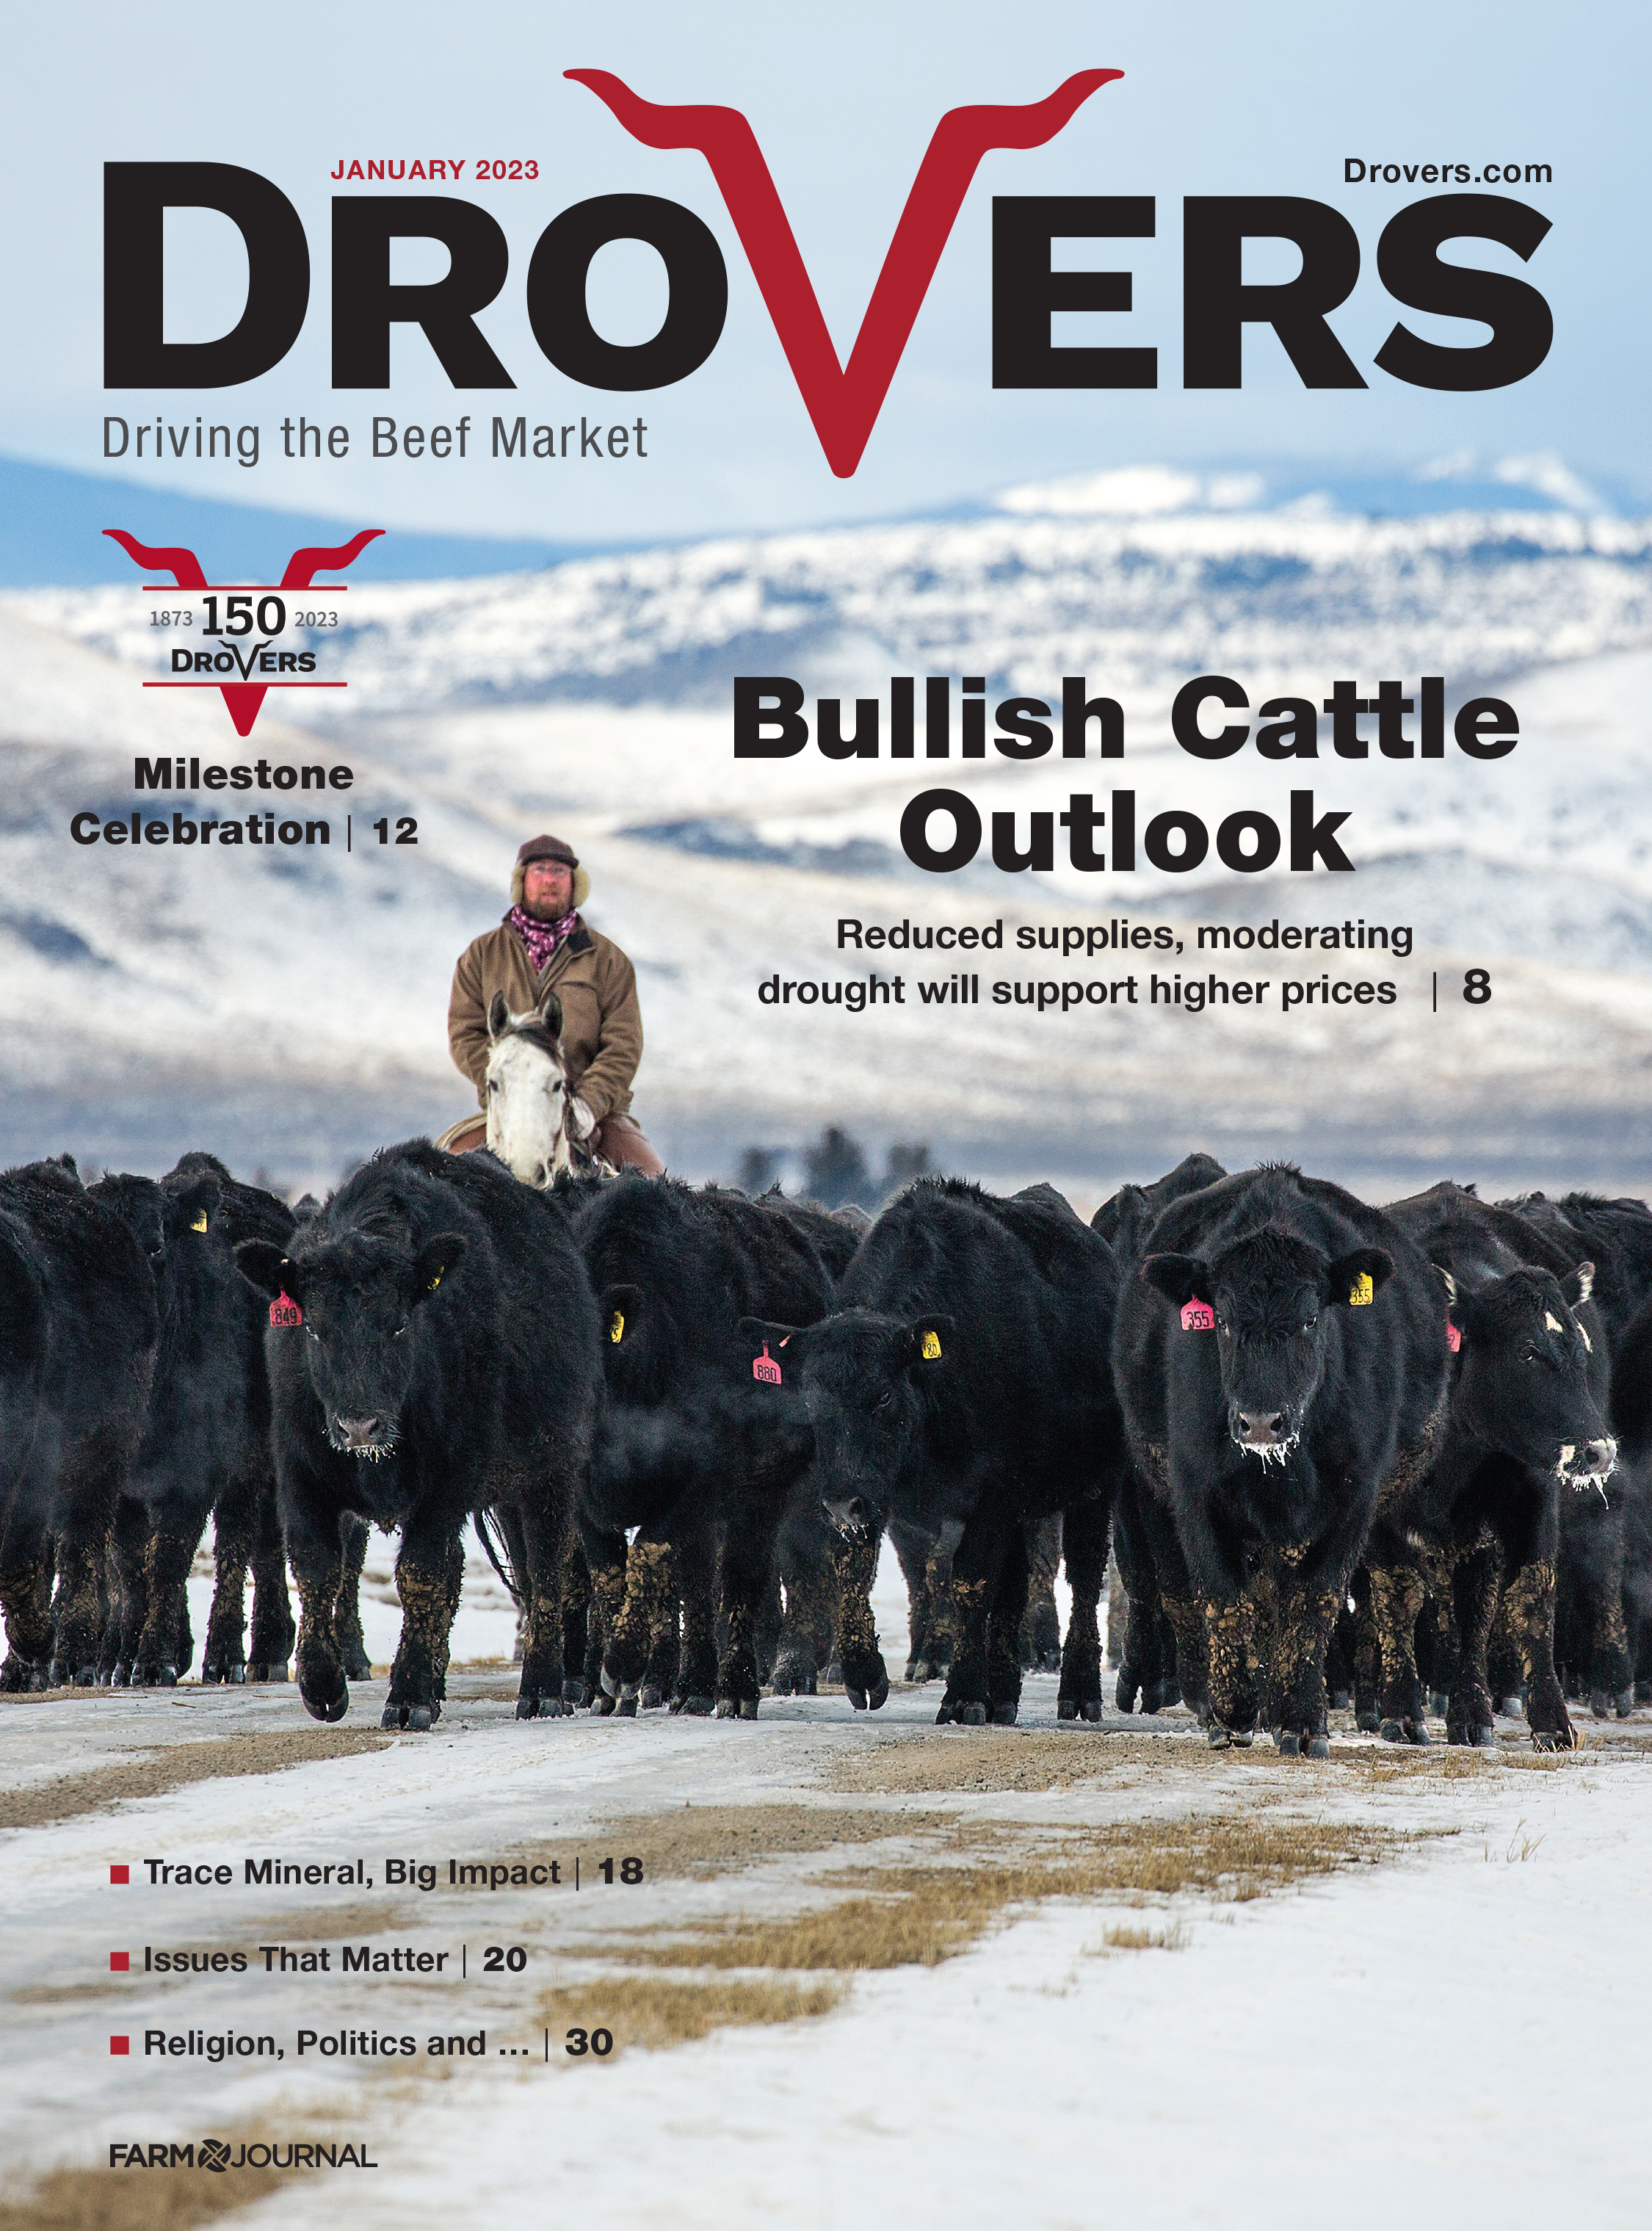  Drovers - January 2023 Cover 